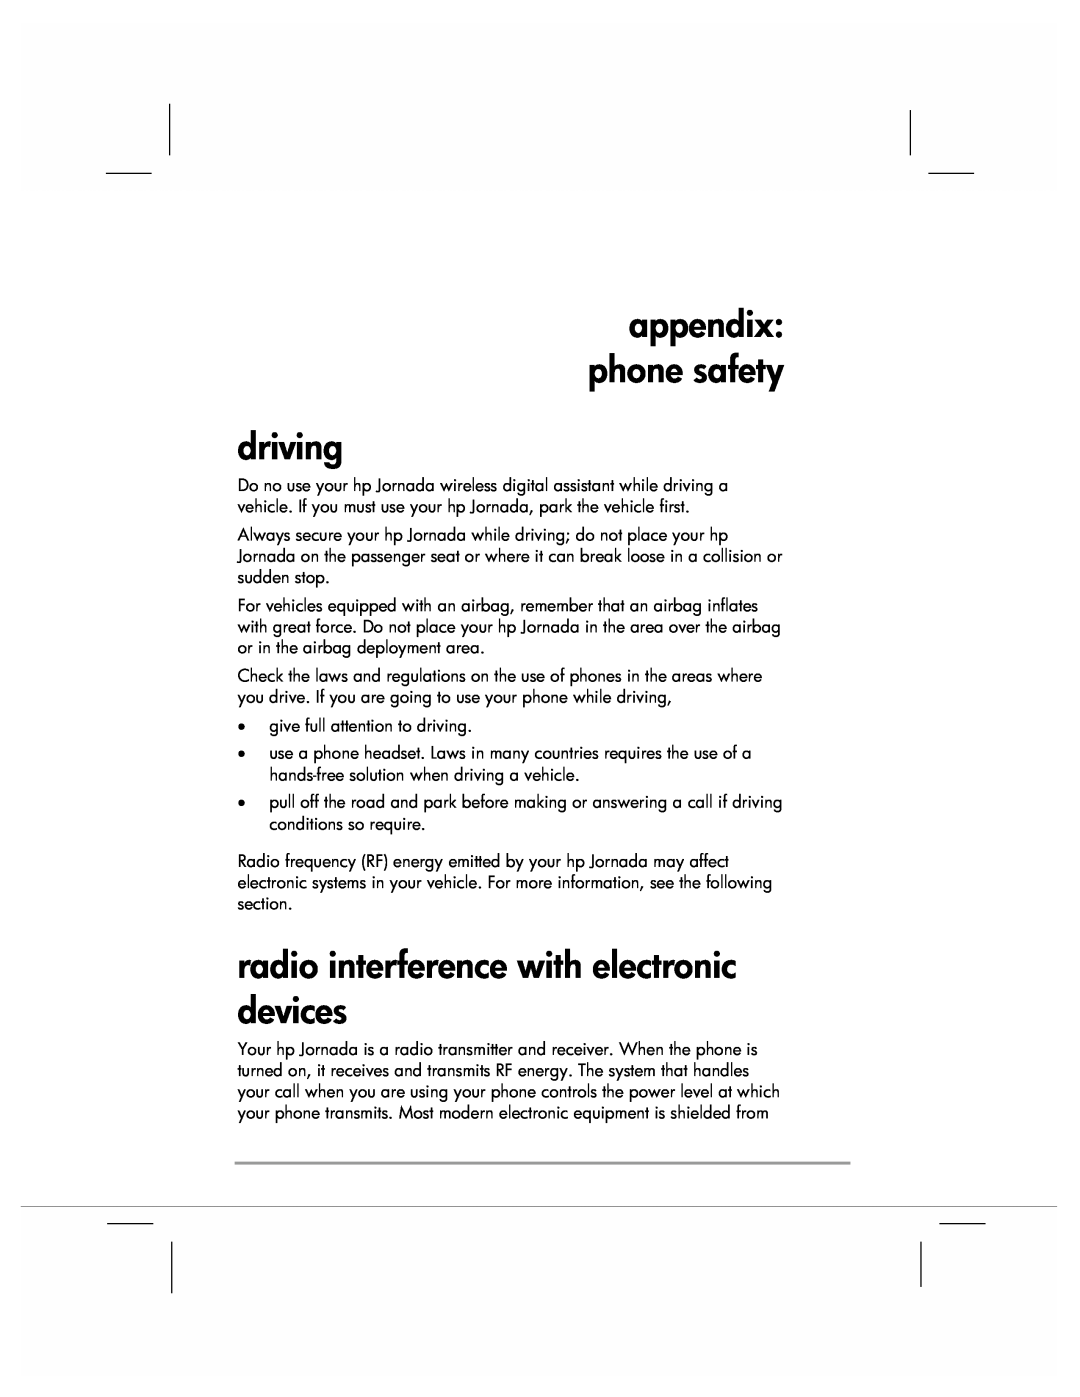 HP 920 manual driving, radio interference with electronic devices, appendix phone safety 